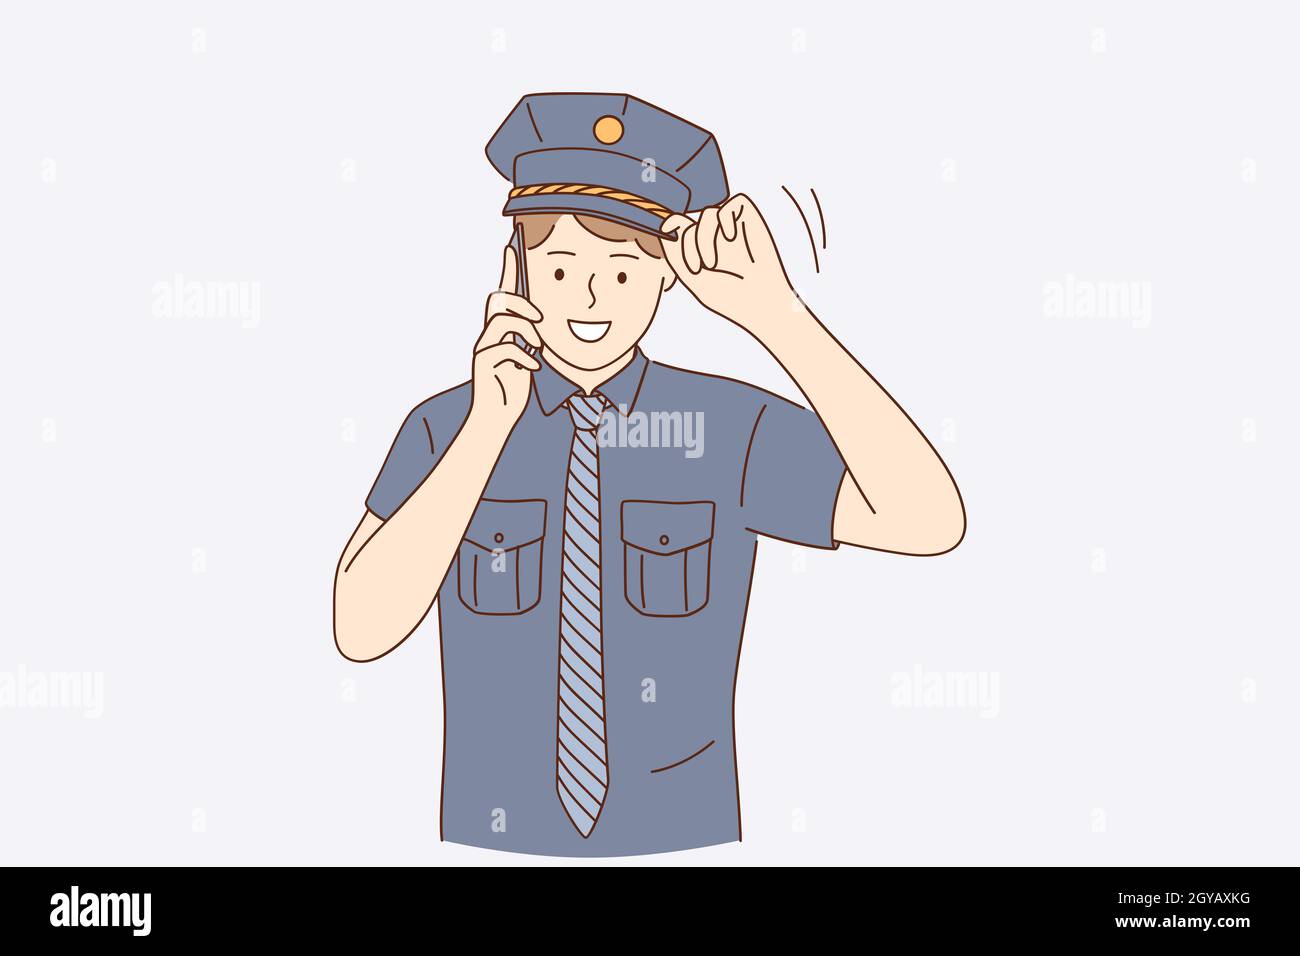 Policeman during work concept. Young handsome positive policeman wearing police uniform talking on smartphone outdoors vector illustration Stock Photo